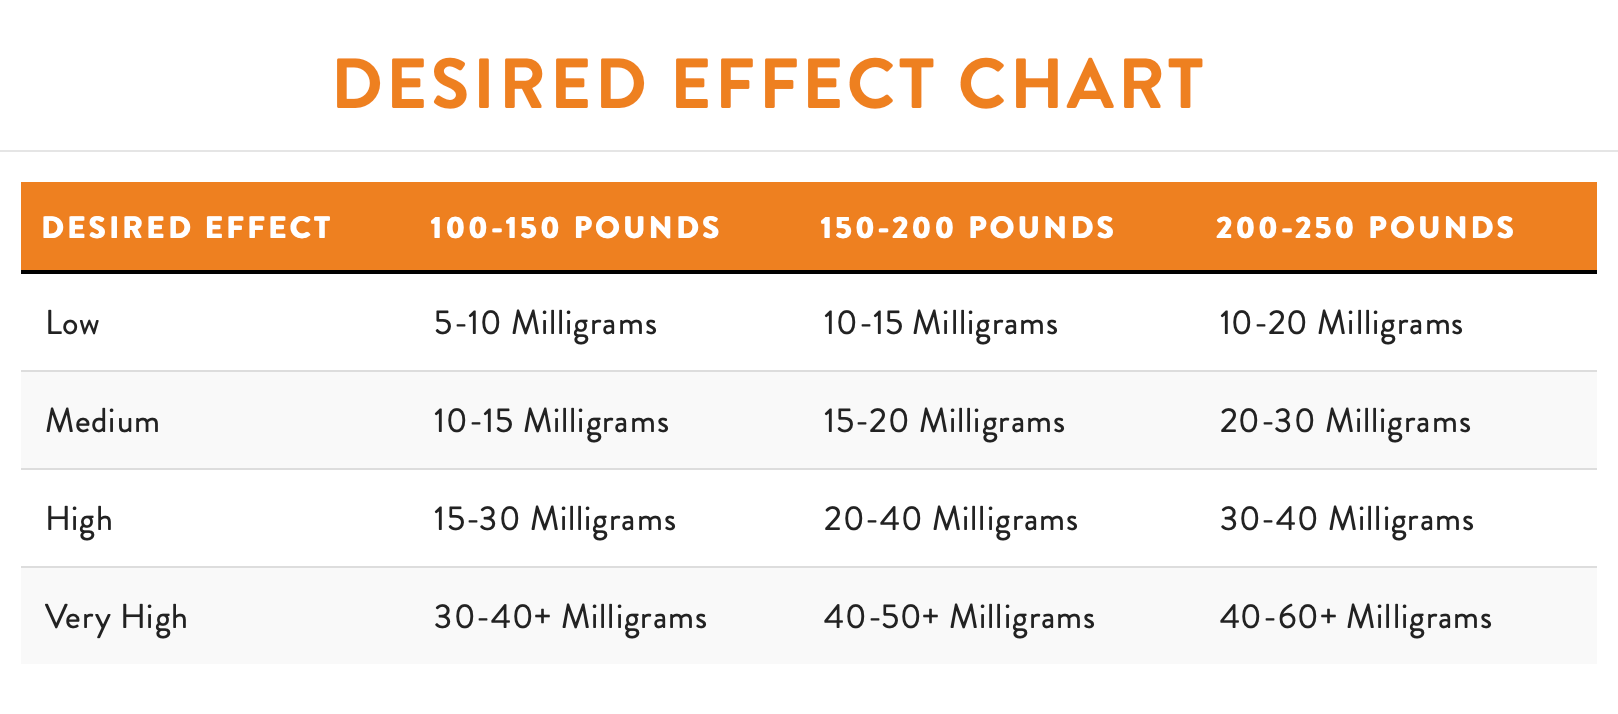 Fuse Health | Desired Effect Chart